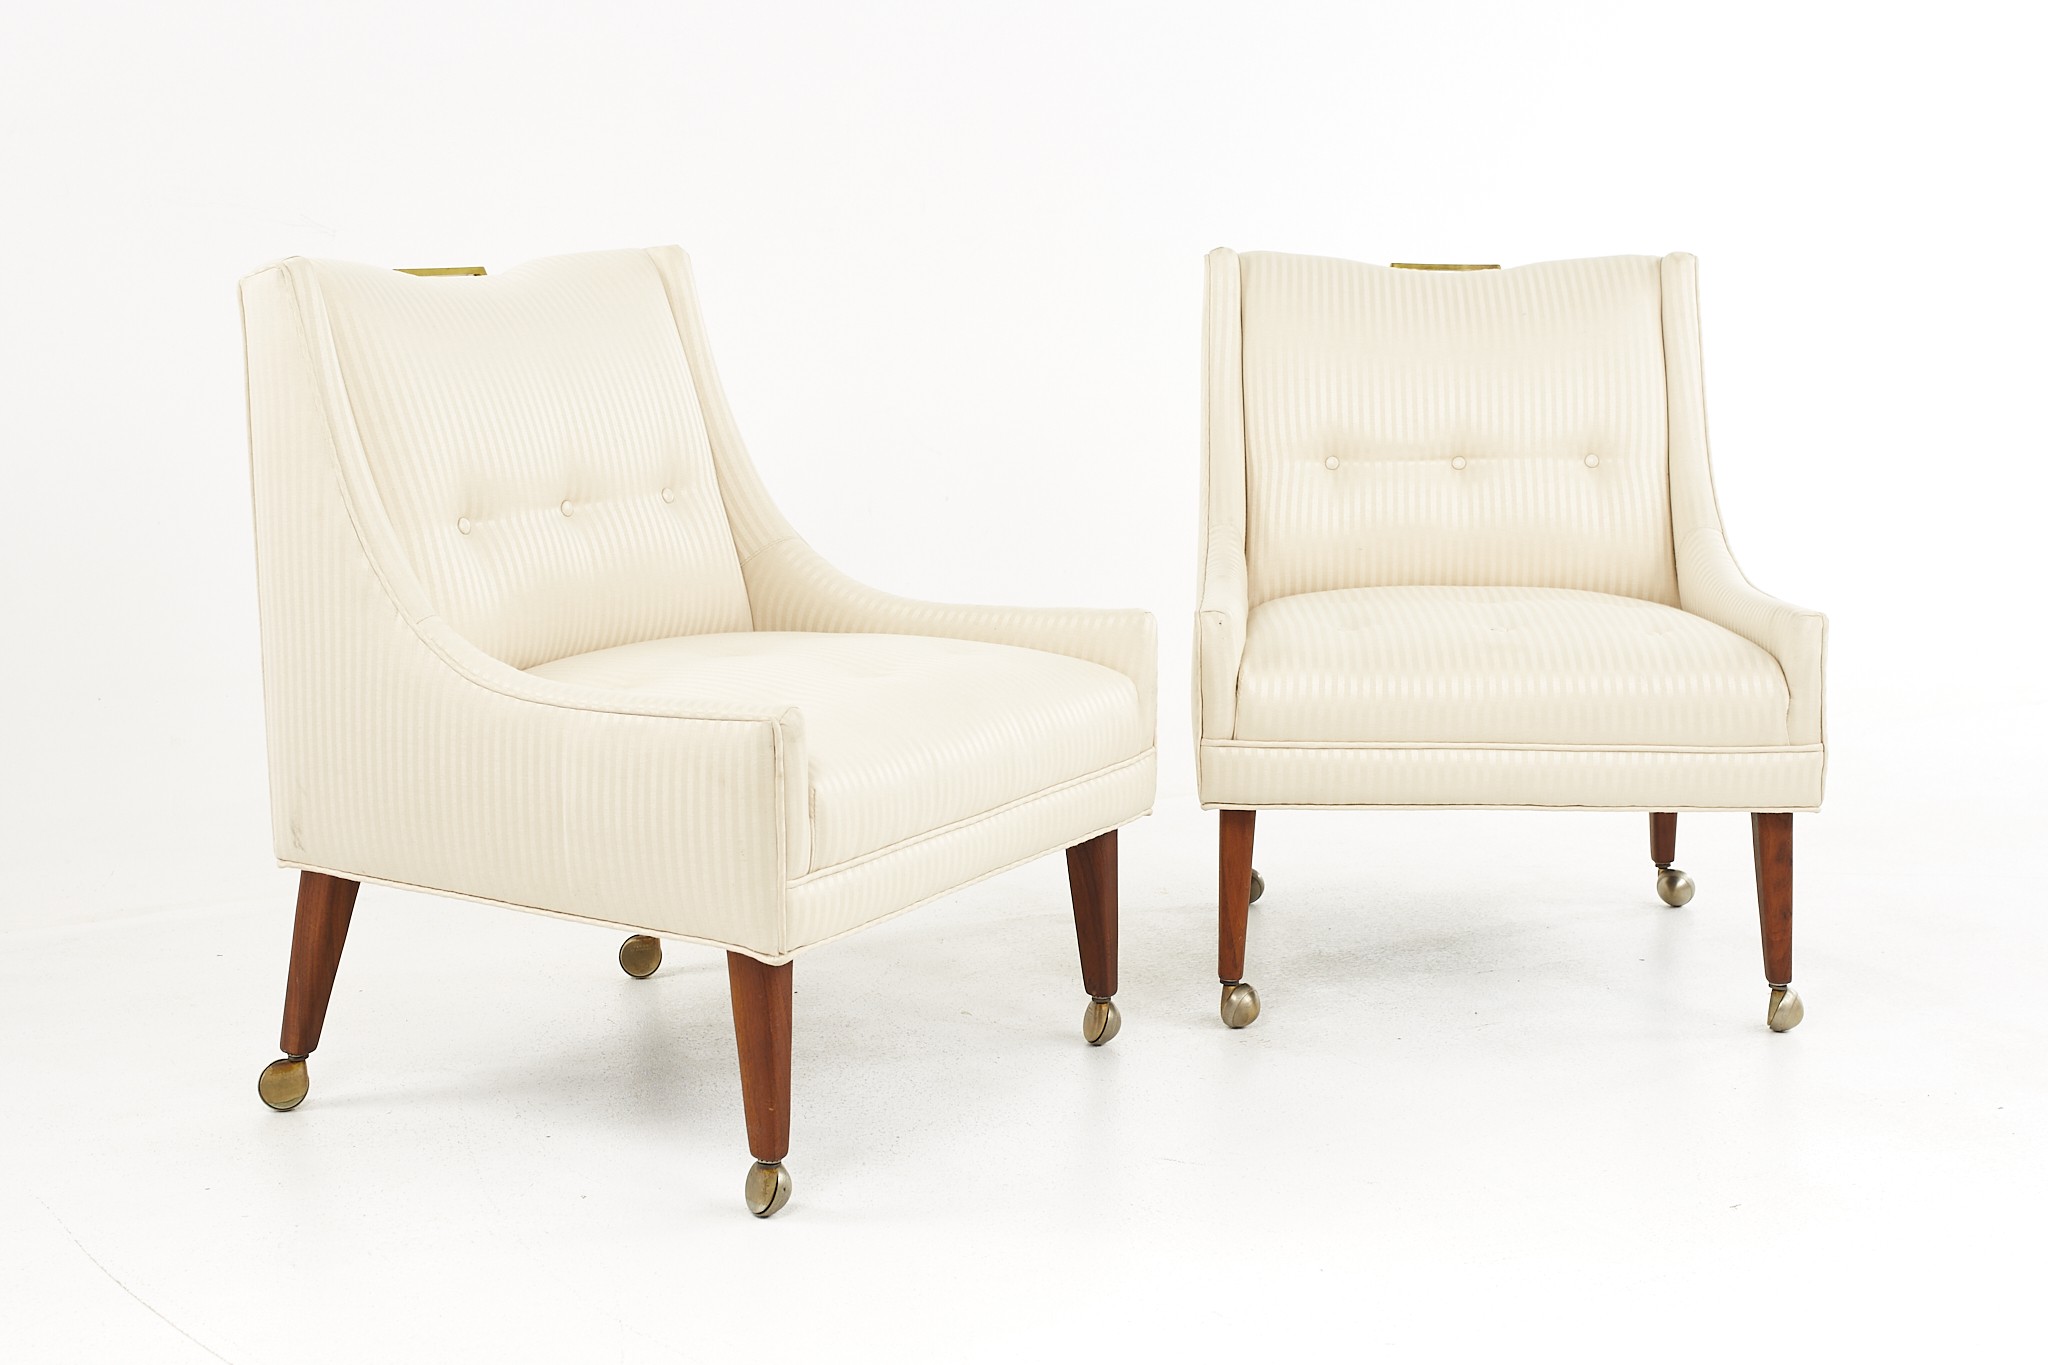 Harvey Probber Style Mid Century Lounge Chairs - a Pair